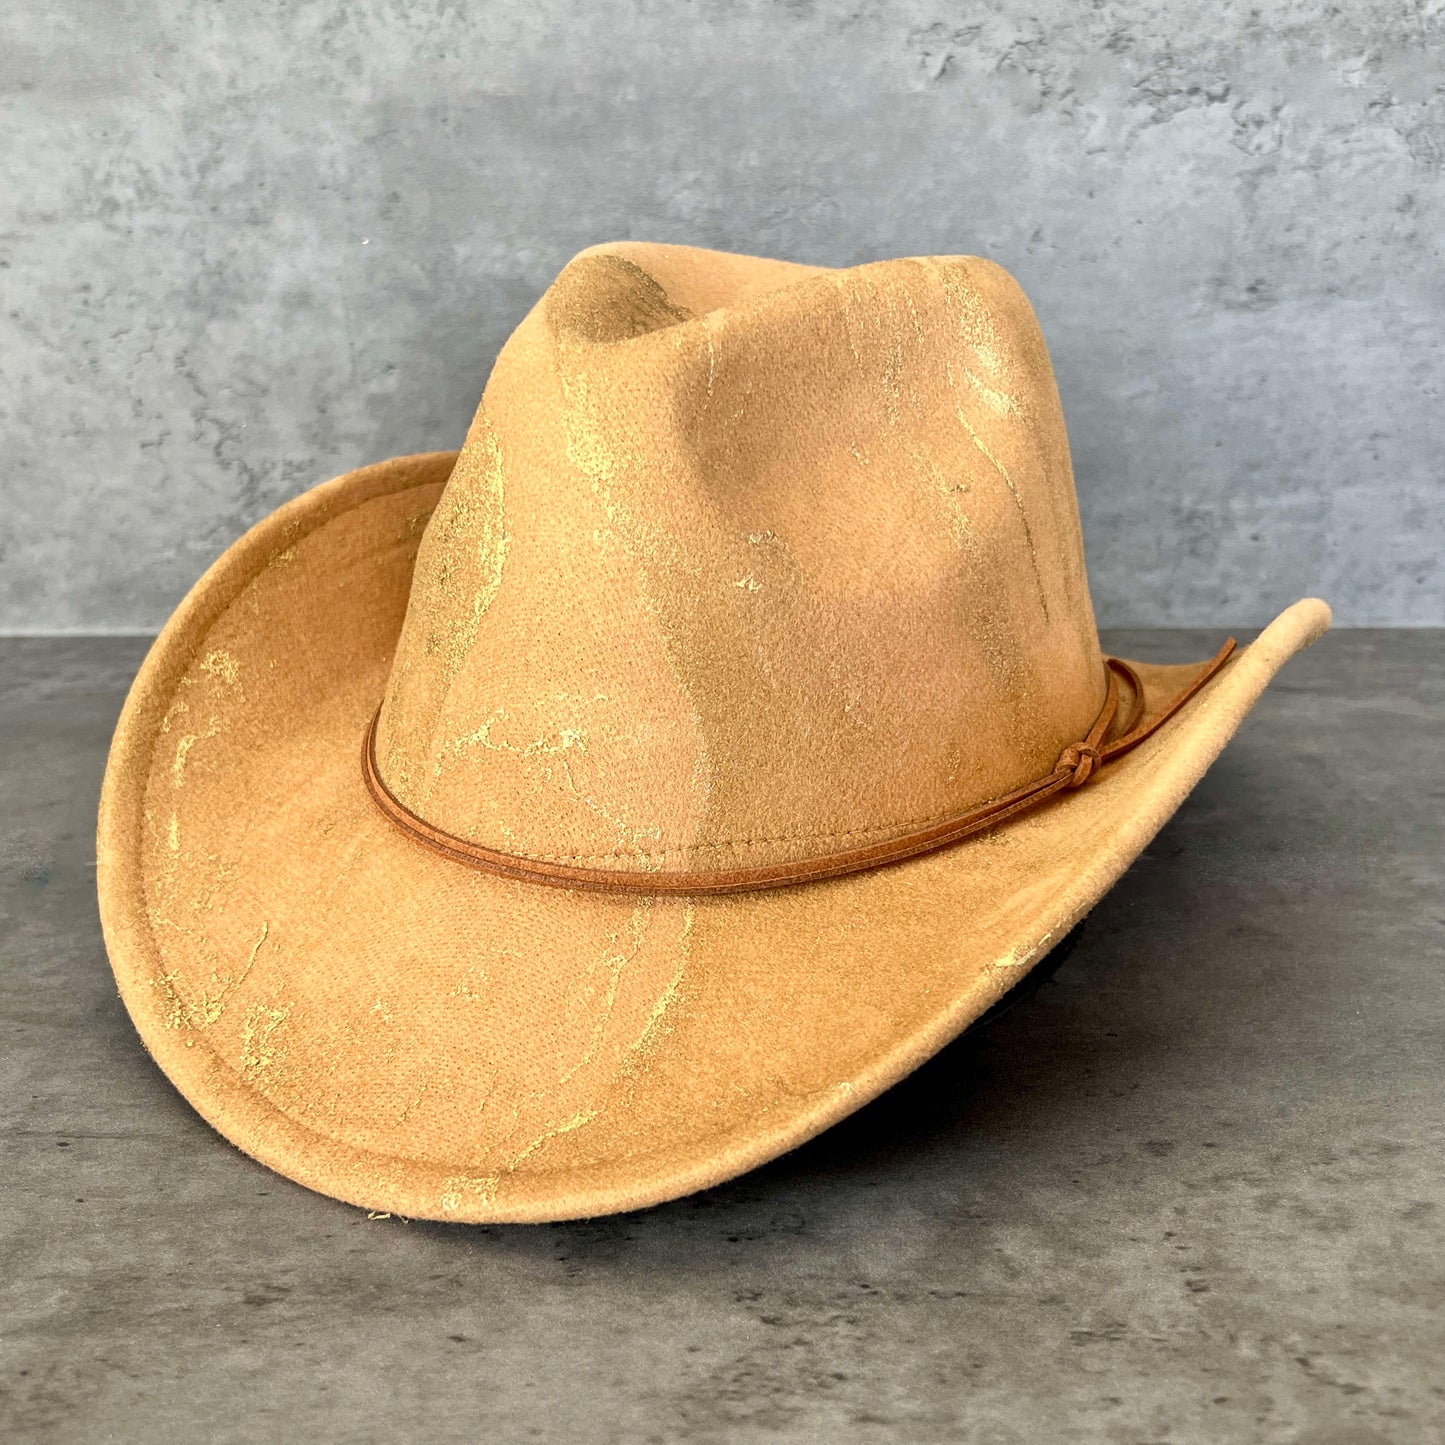 Tan khaki western cowboy hat painted with gold marbling. Has light brown faux suede cord hat band. 